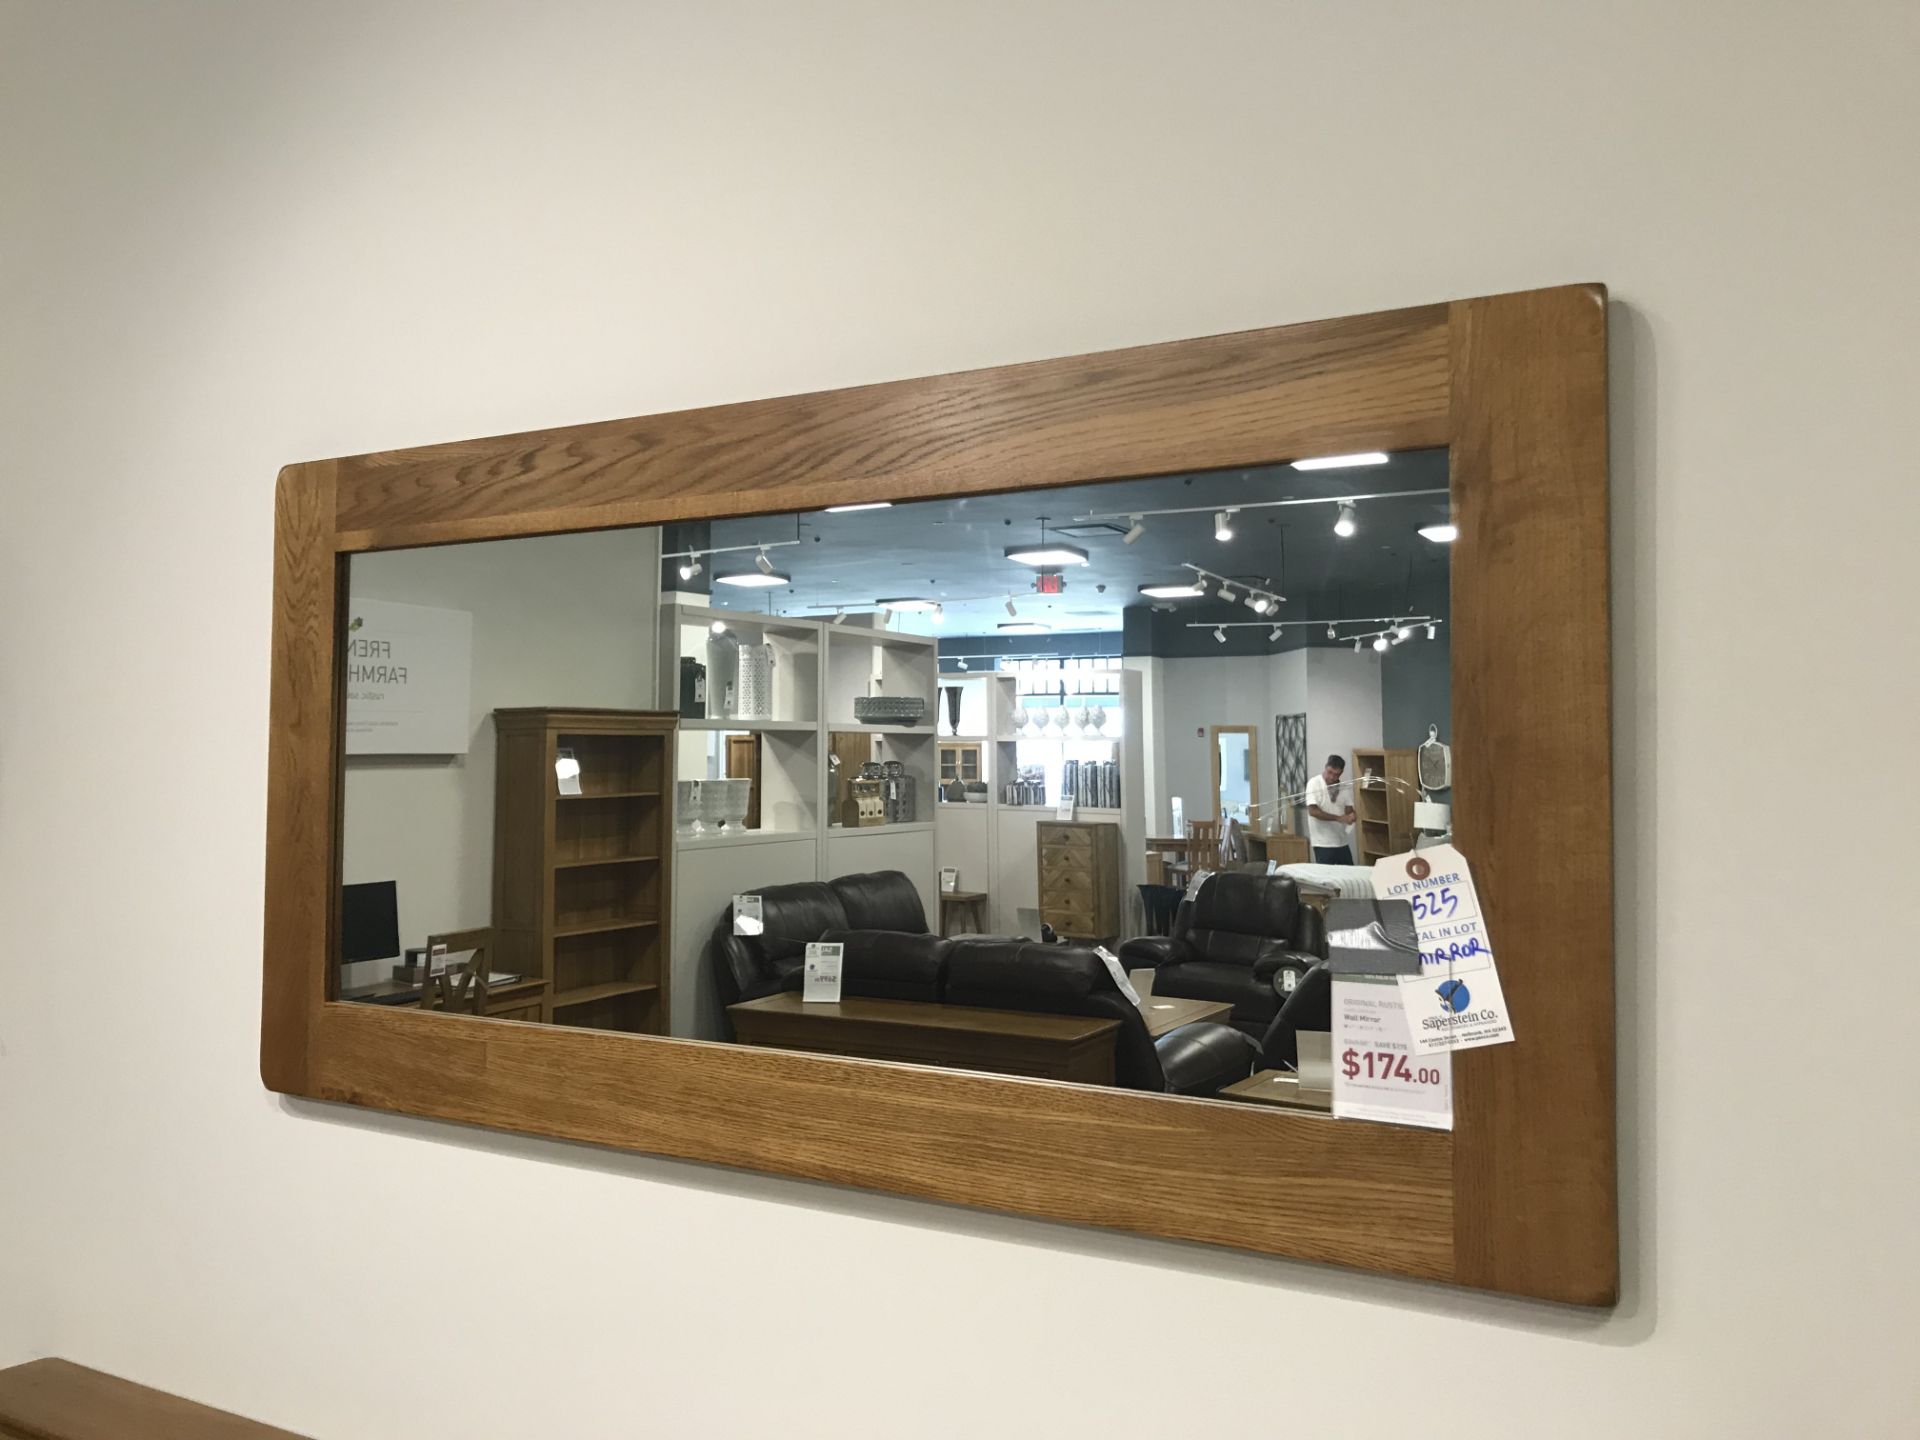 Wall Mirror (Original Rustic) See Picture For Dimensions and Product Info